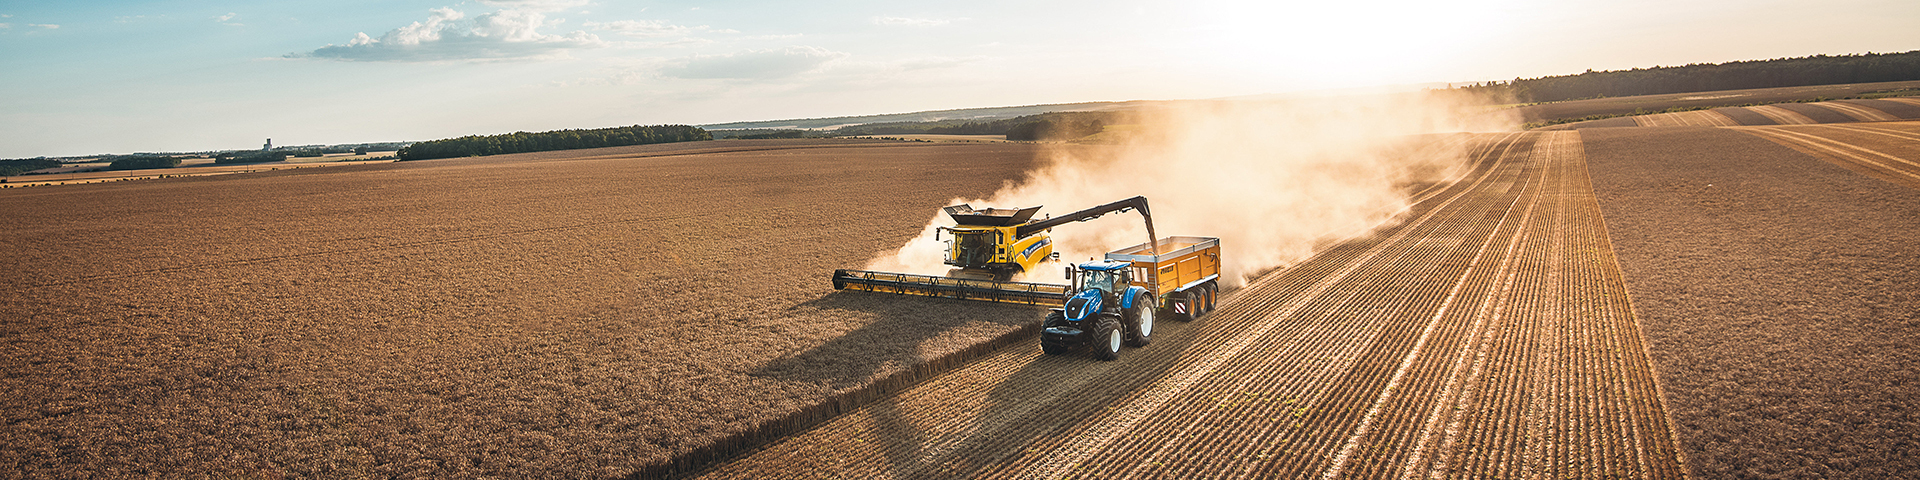 New Holland Brand Vision and Values